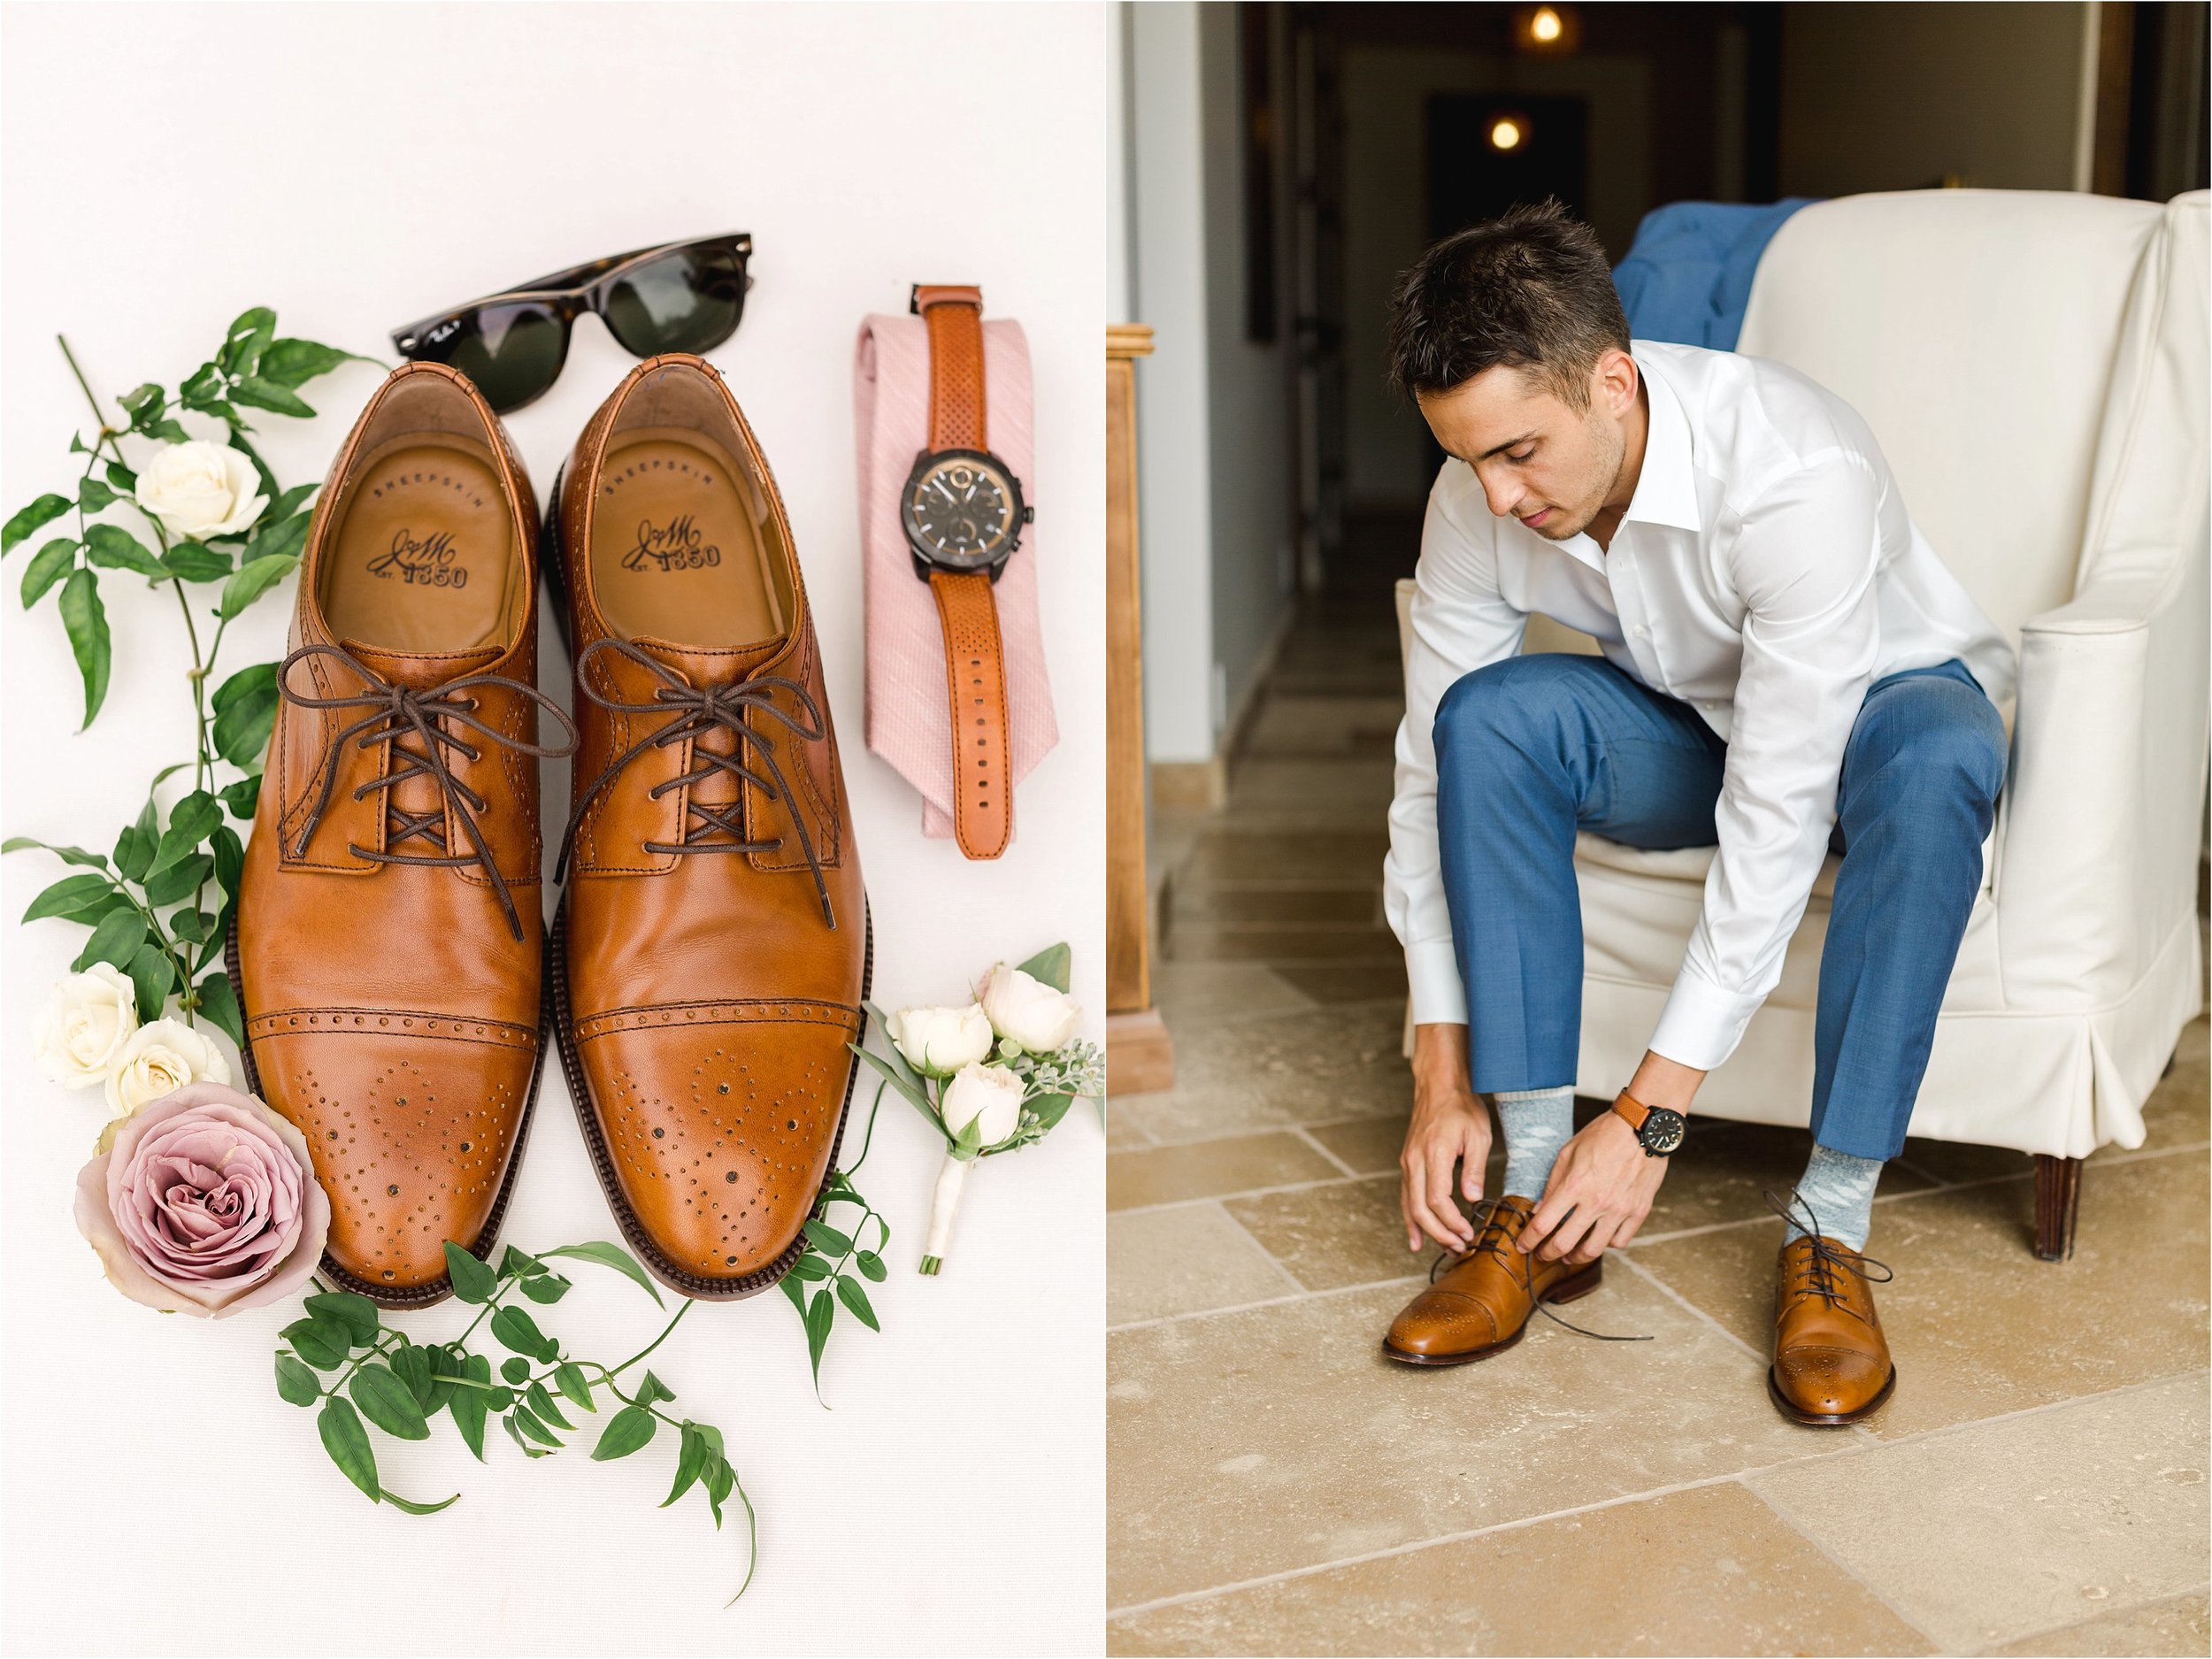 The image on the left is a flat-lay of the groom's details featuring his brown shoes, RayBan sunglasses, blush tie, brown leather watch and white rose boutonnière. The image on the right shows the groom tying his shoe while getting ready for his wedding. 